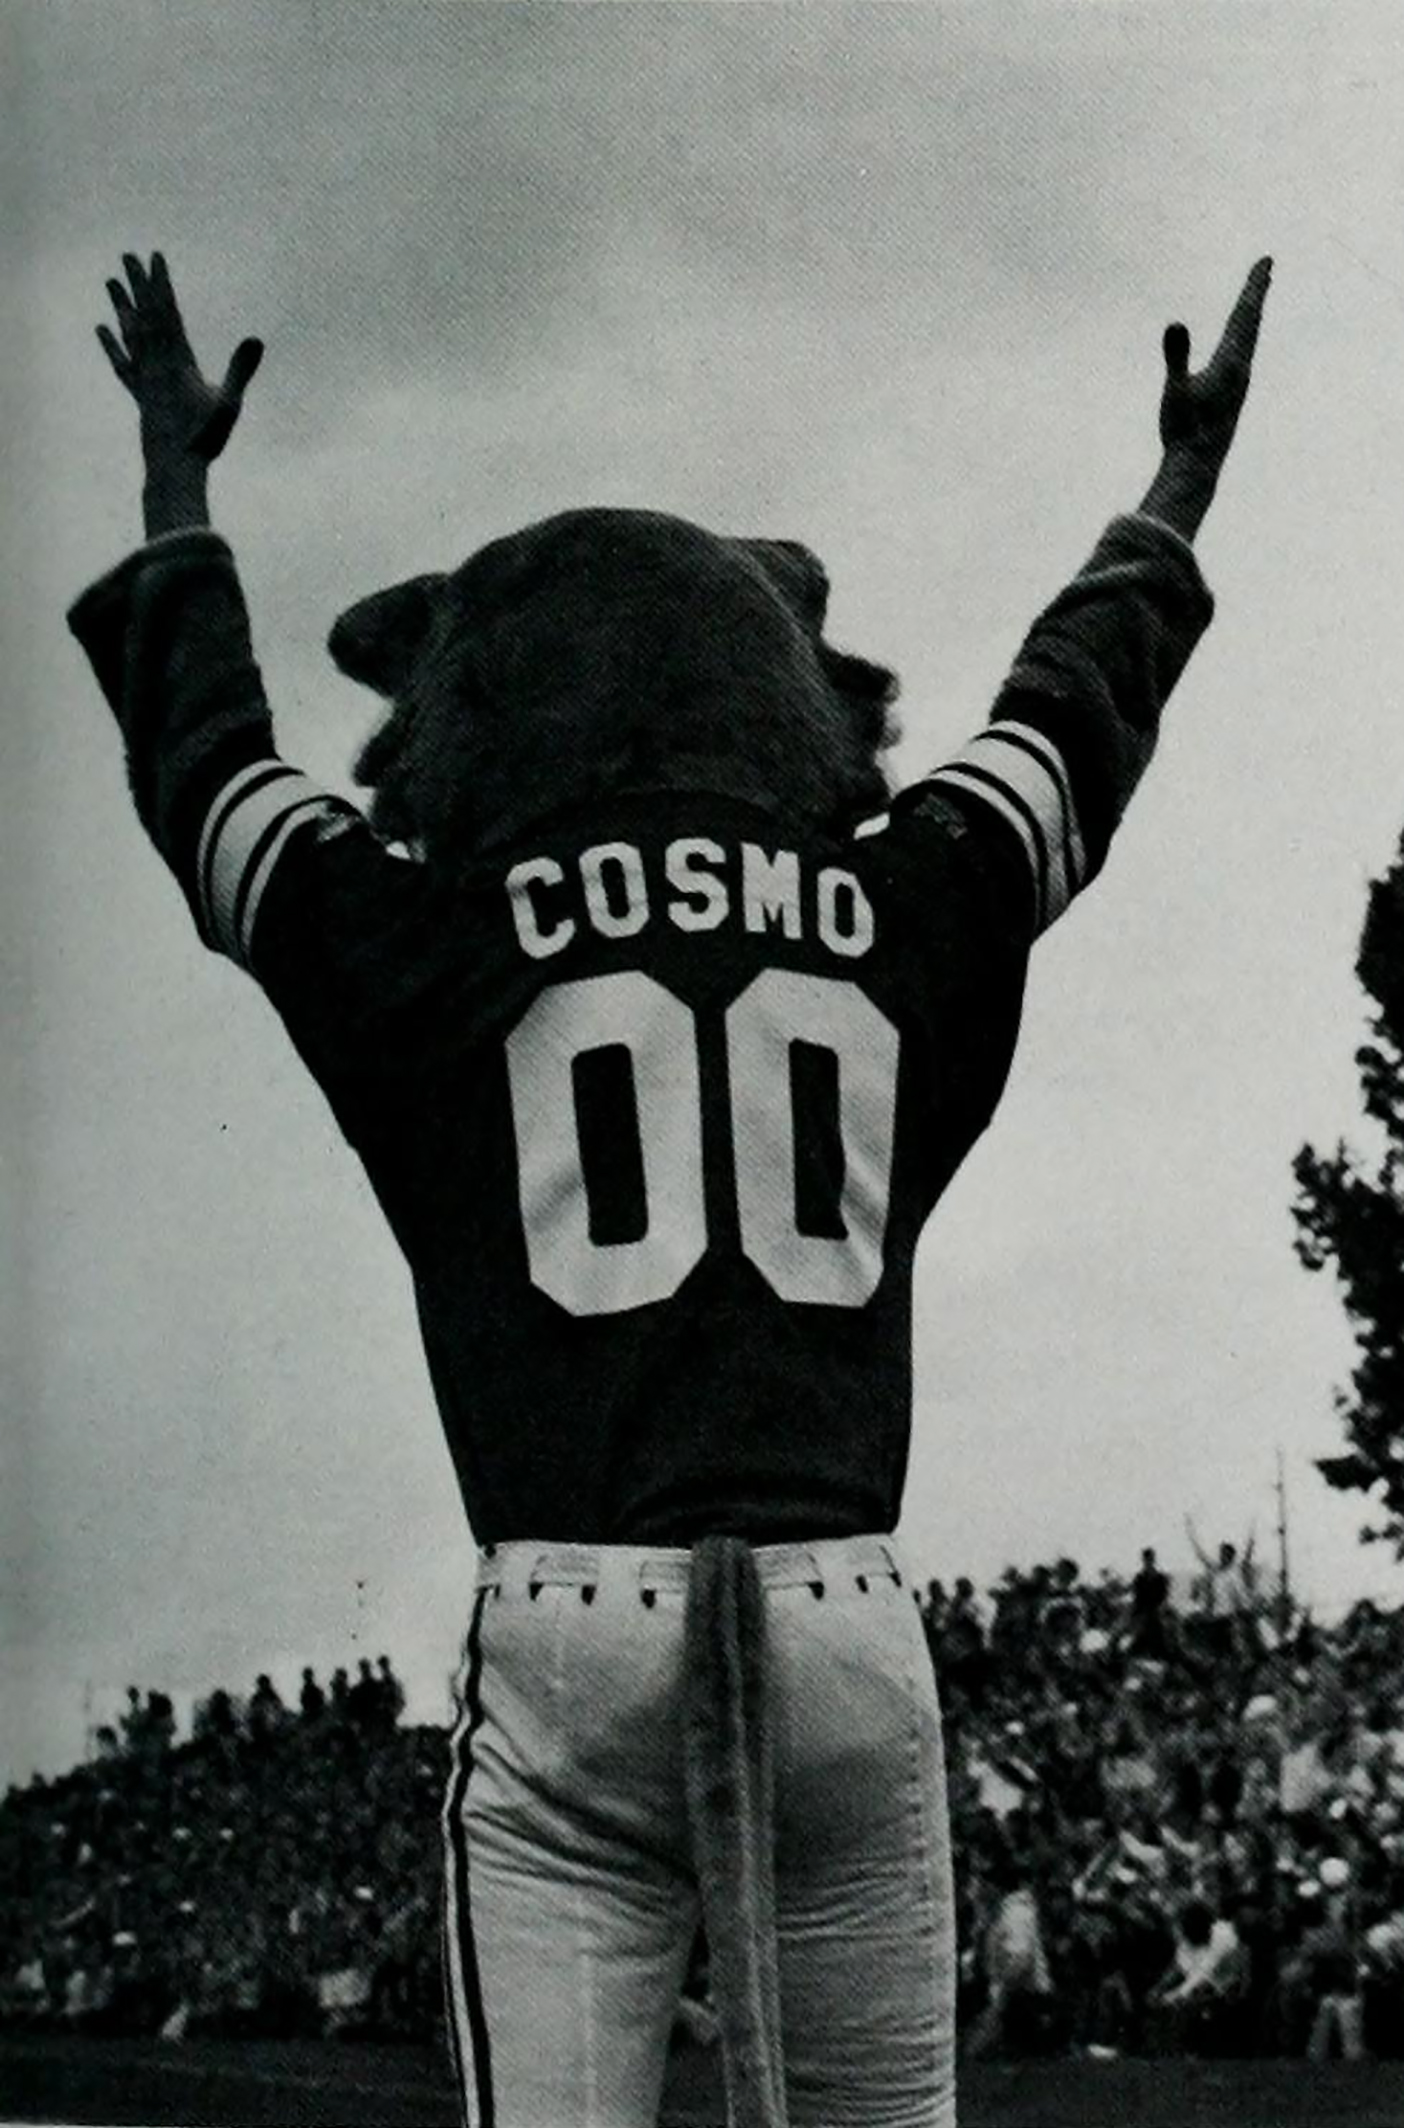 Cosmo stands at a football game with his hands above him in celebration.